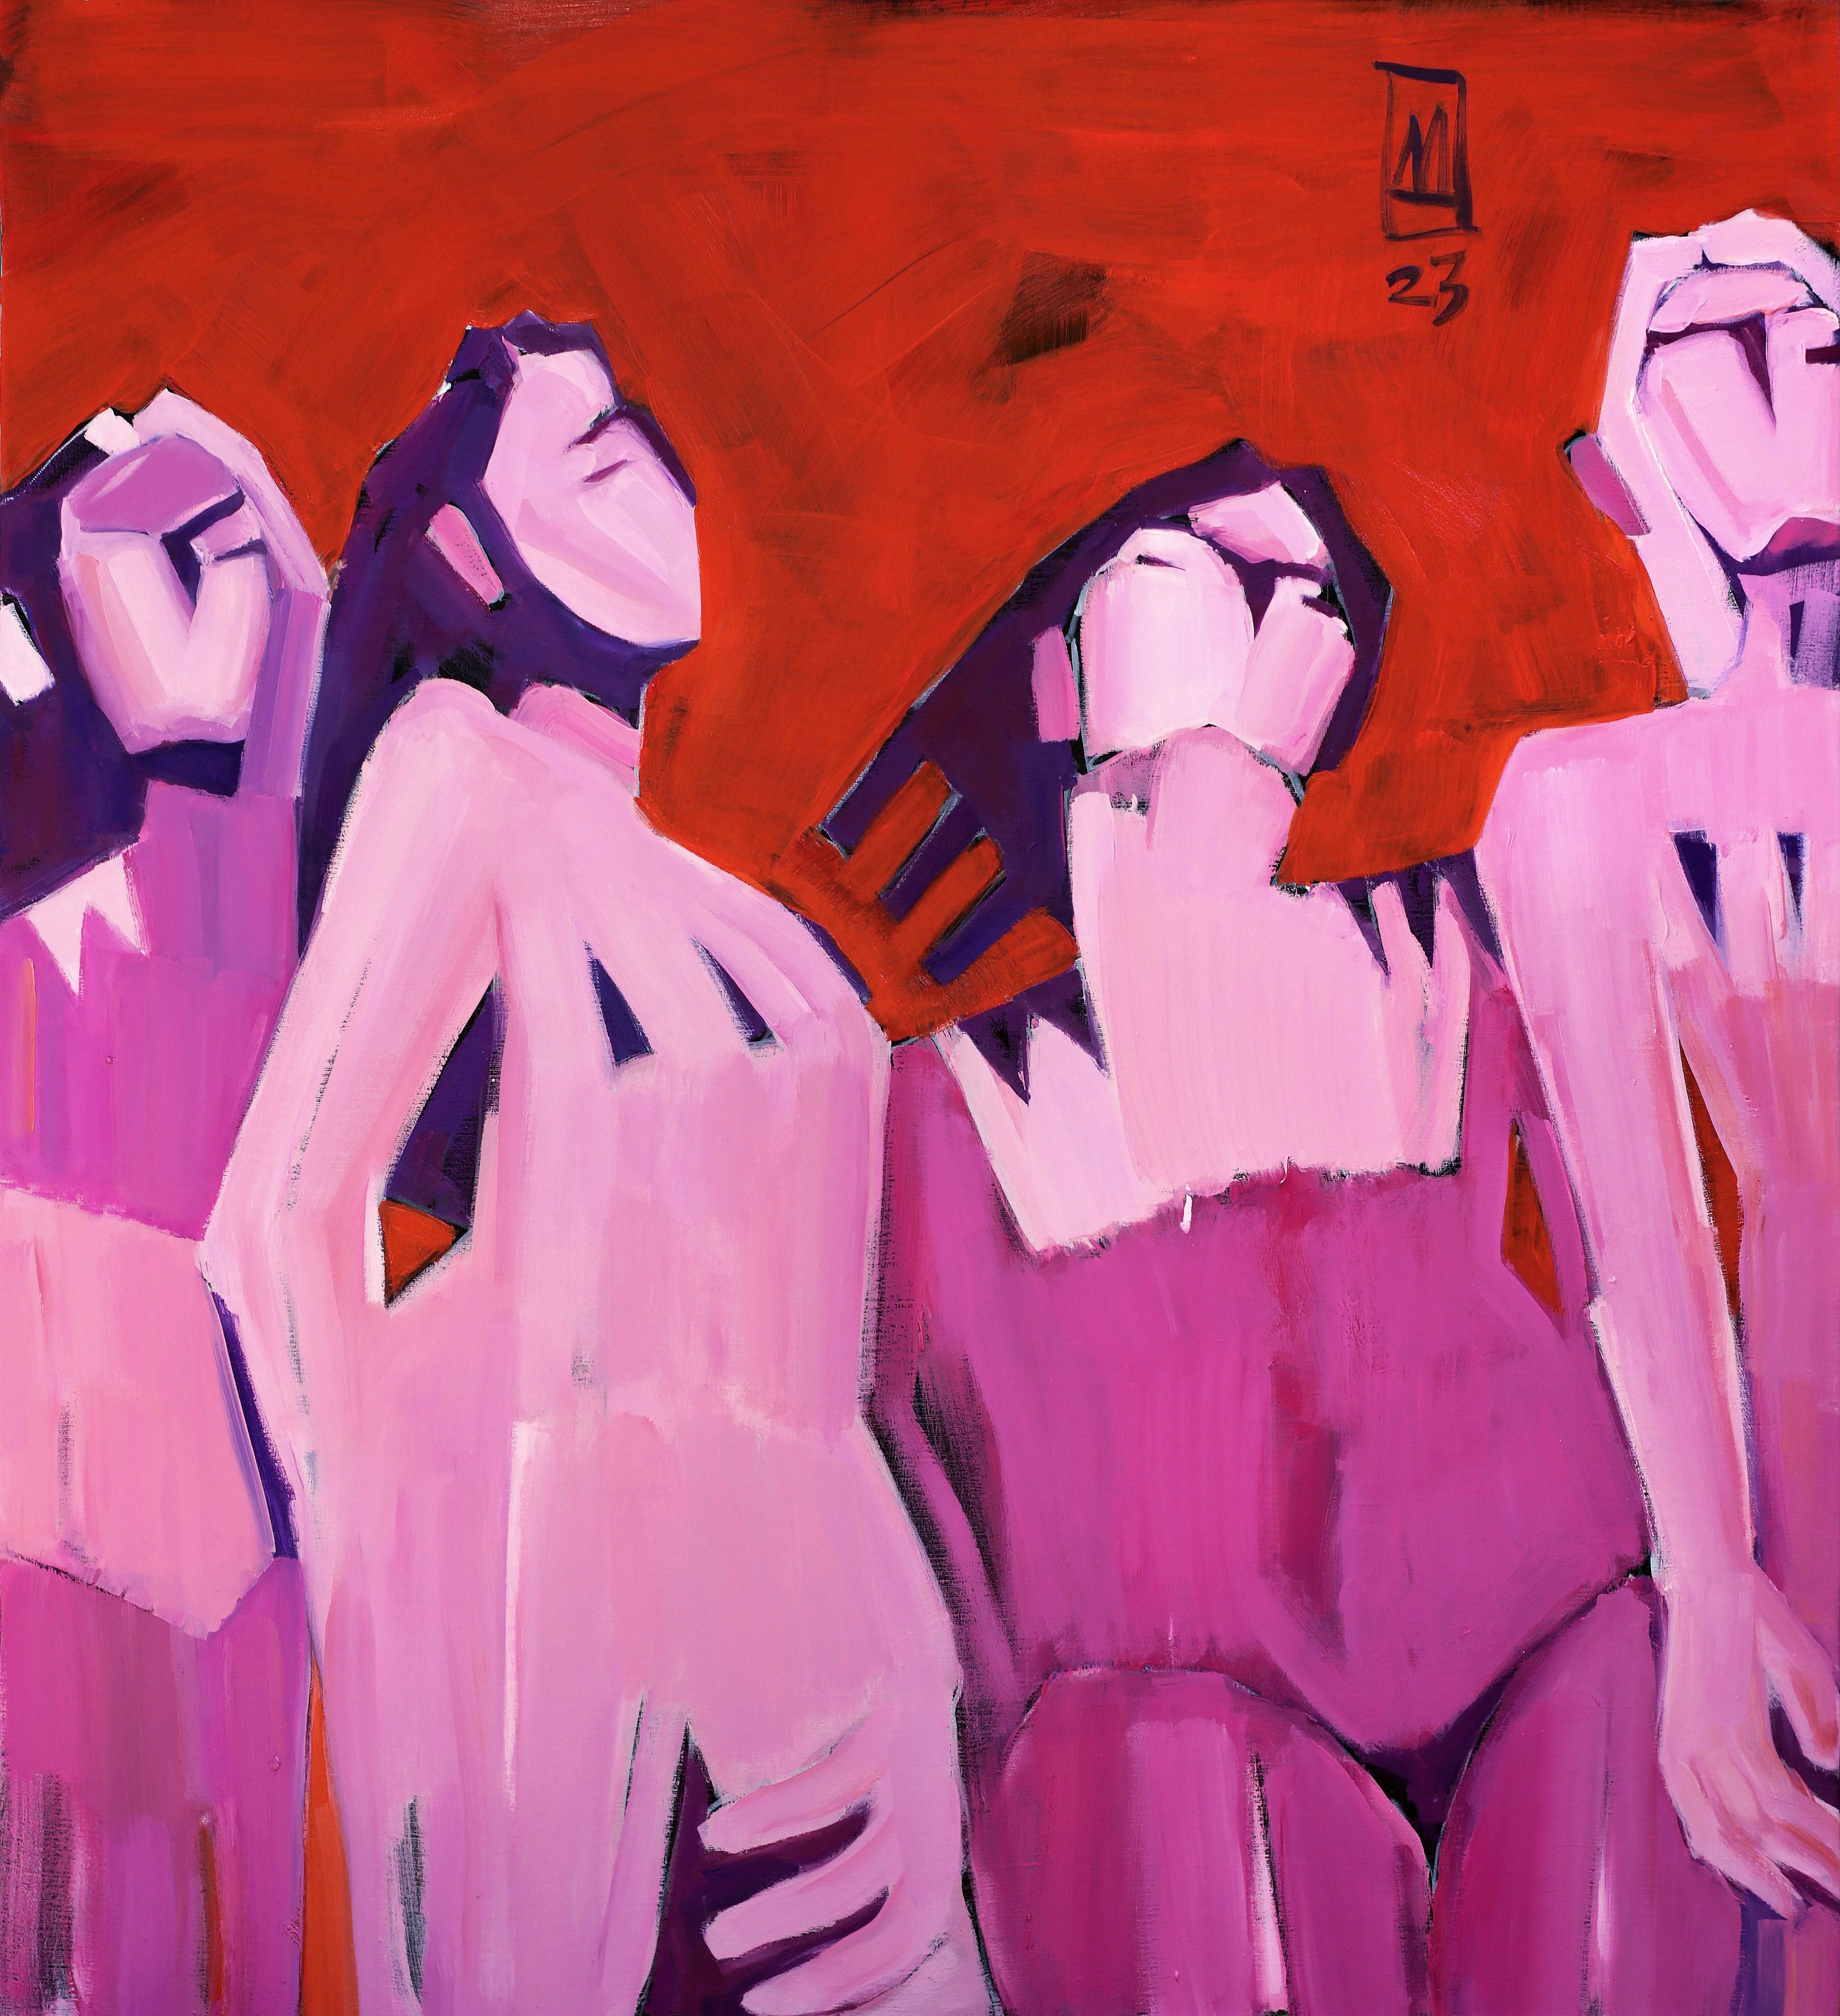 "Bathers" Oil Painting 39" x 35" inch by Anastasiia Danilenko

Anastasiia Danilenko is an artist and graphic designer. 
But the area of her occupation is painting and such a traditional painting genre as portrait. 
Although it cannot be called